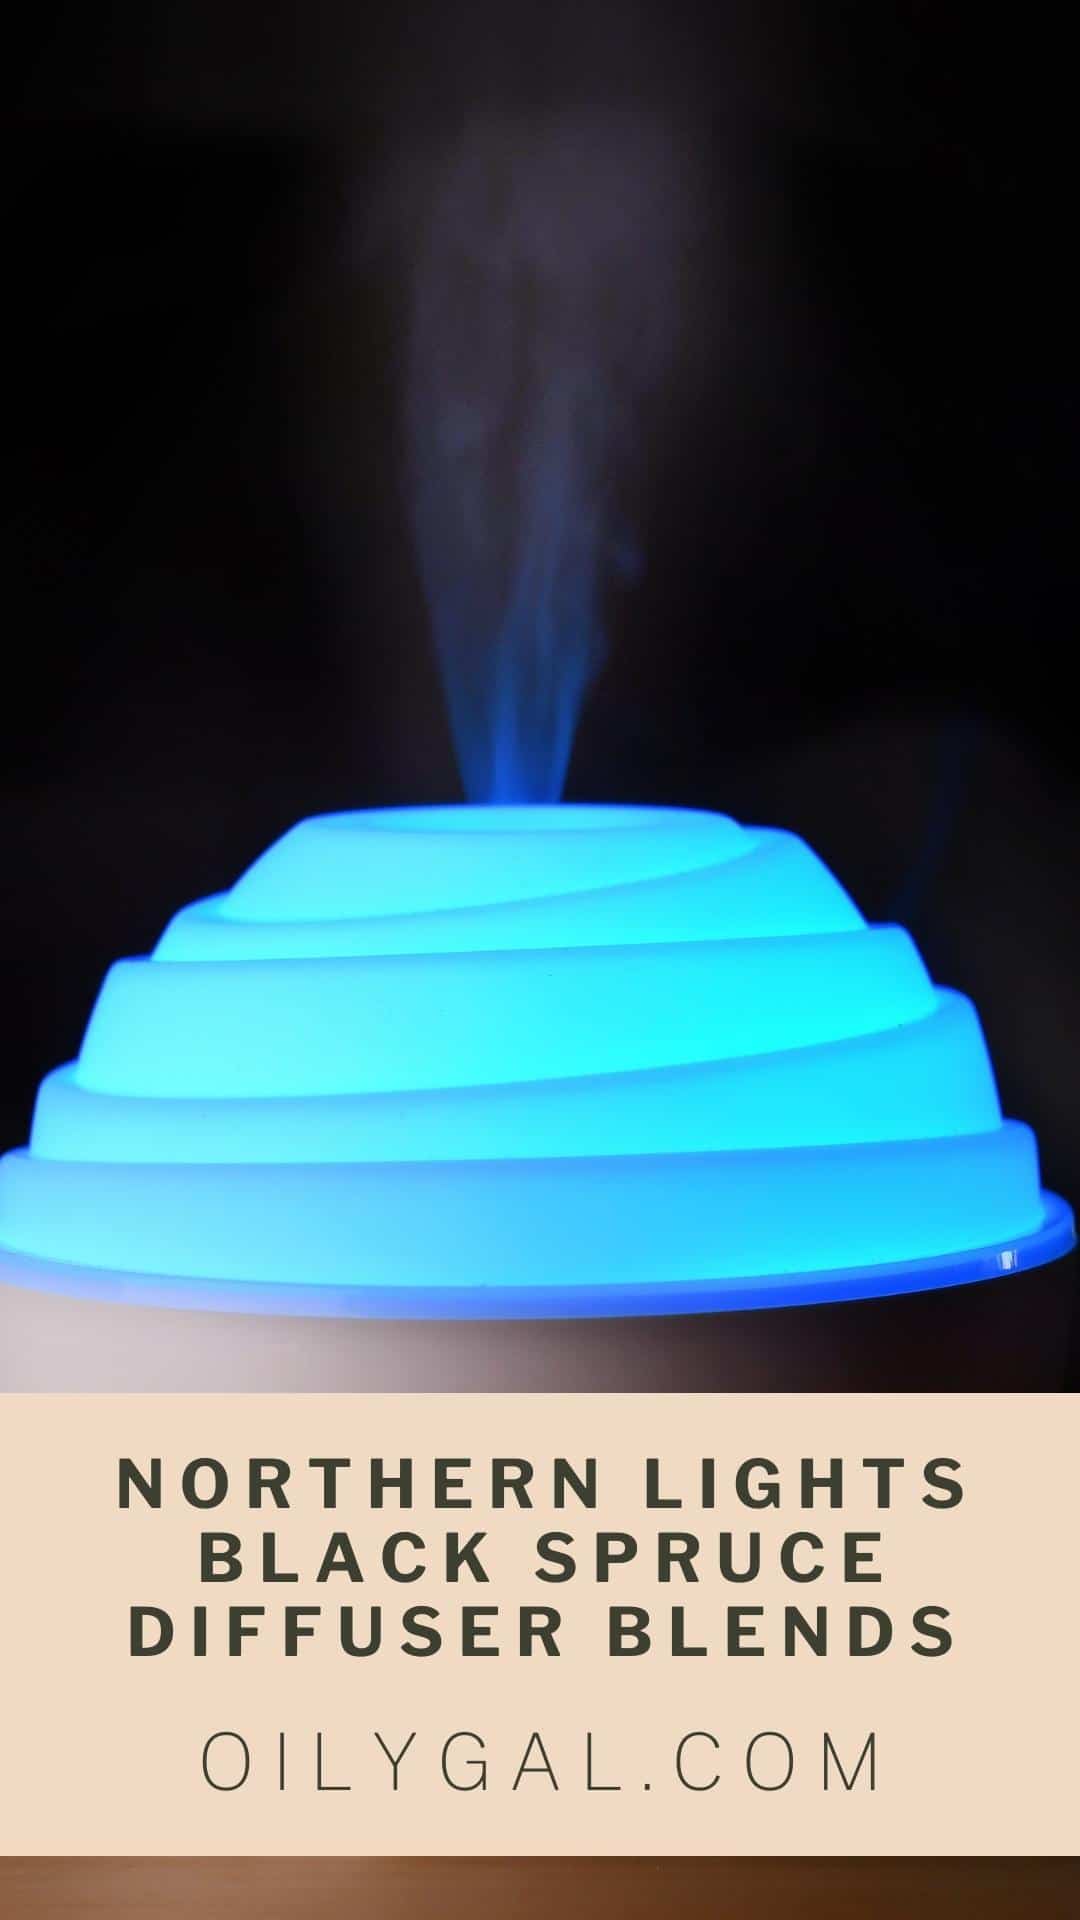 Northern Lights Black Spruce Essential Oil Blends Well With